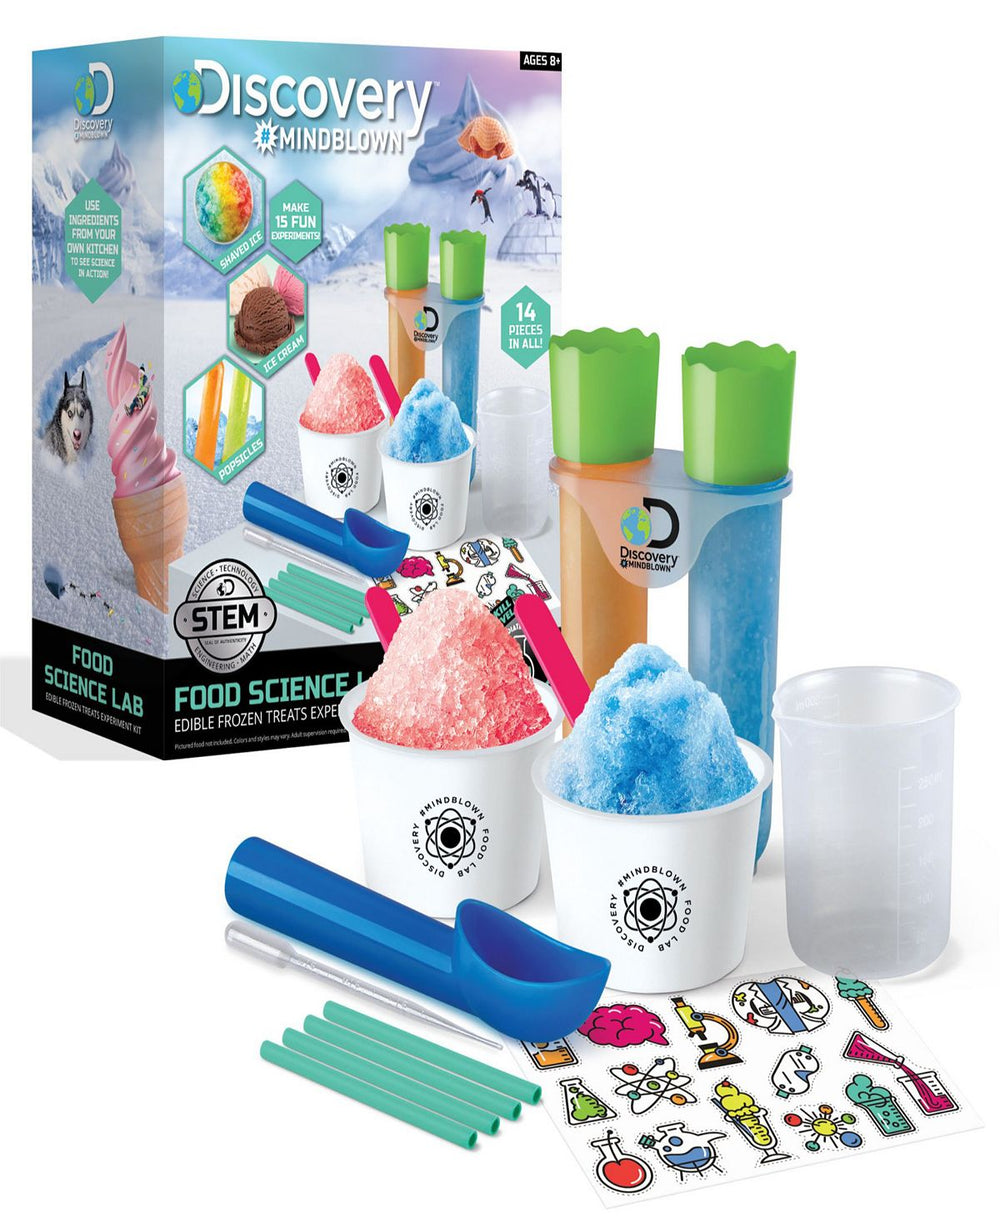 Discovery Mindblown Food Science Lab Kit: Frozen Treats Edition